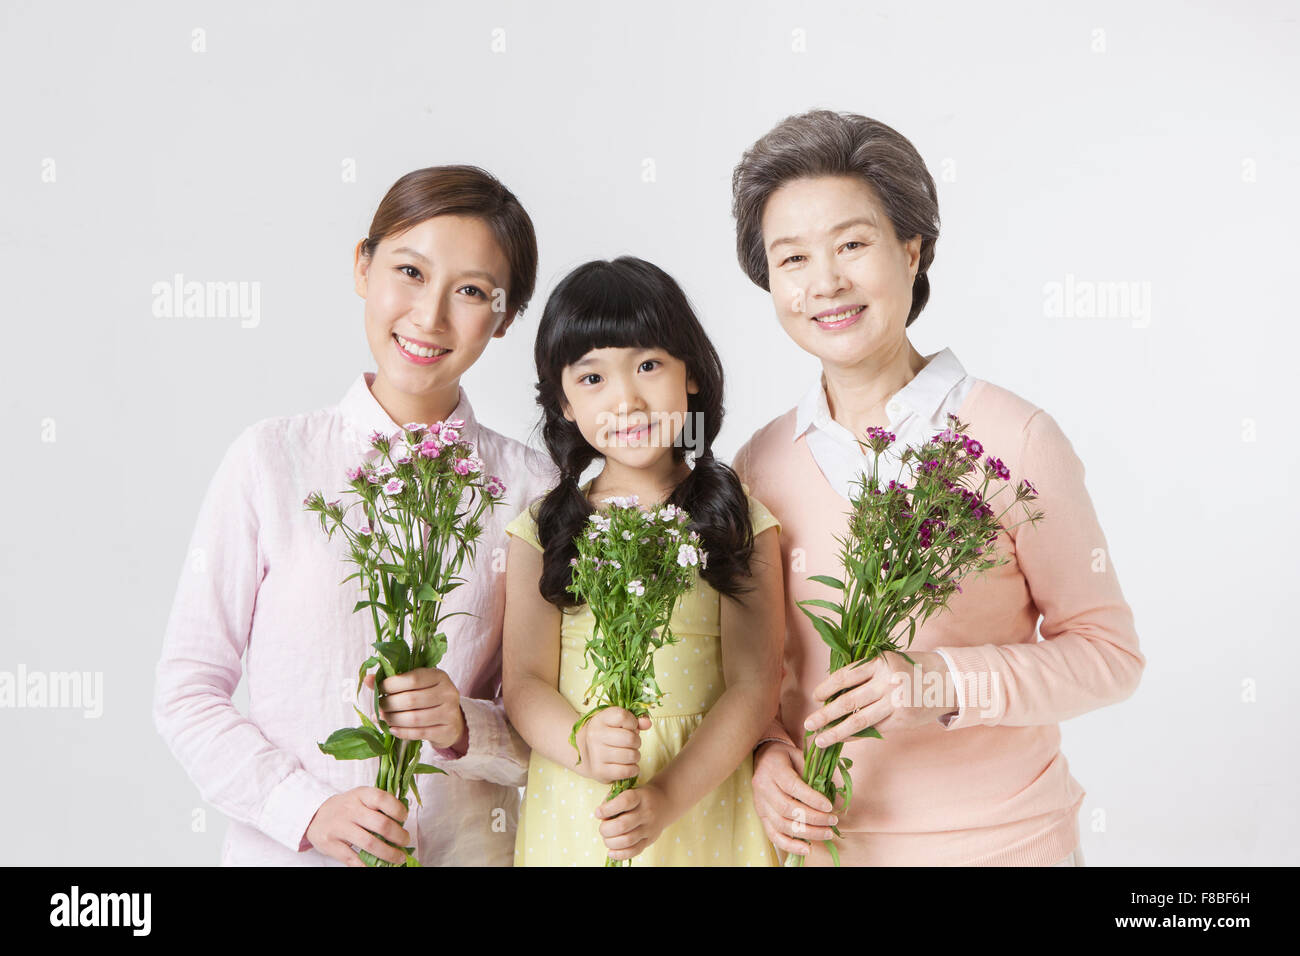 Young adult woman, young girl, and senior woman all holding flowers and staring forward with a smile Stock Photo